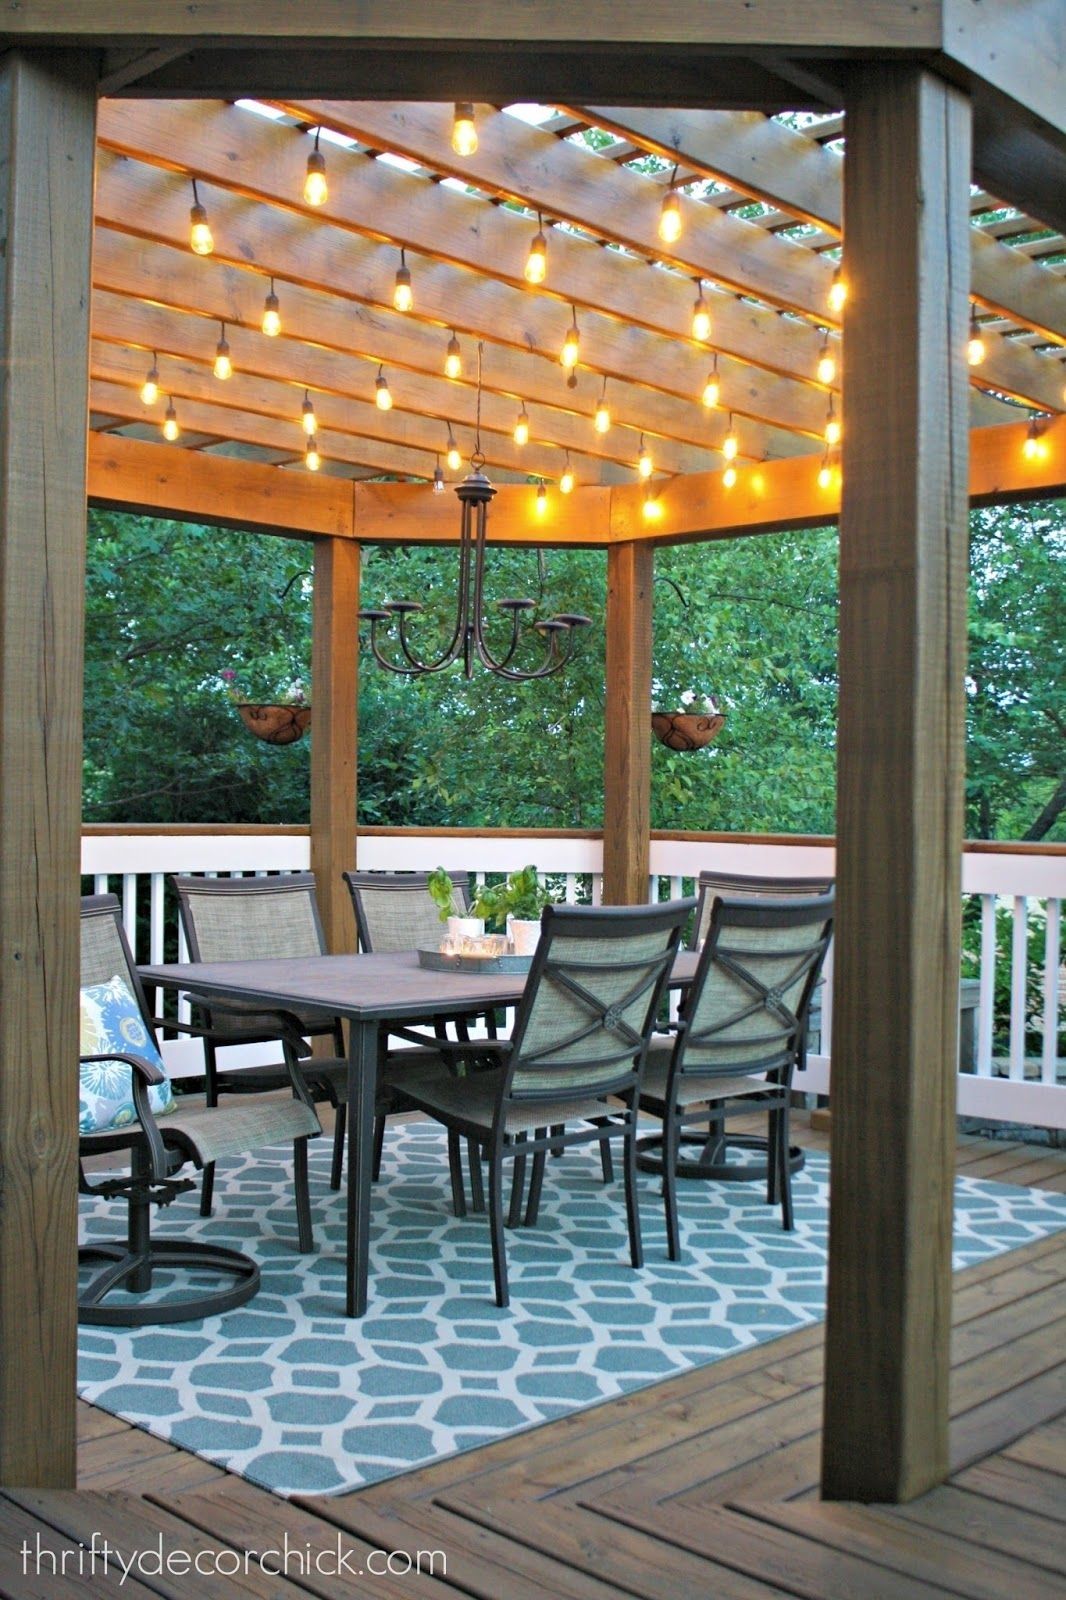 Our Beautiful Outdoor Dining Room | Lights, Pergolas And Backyard Intended For Outdoor Hanging Lights For Pergola (View 13 of 15)